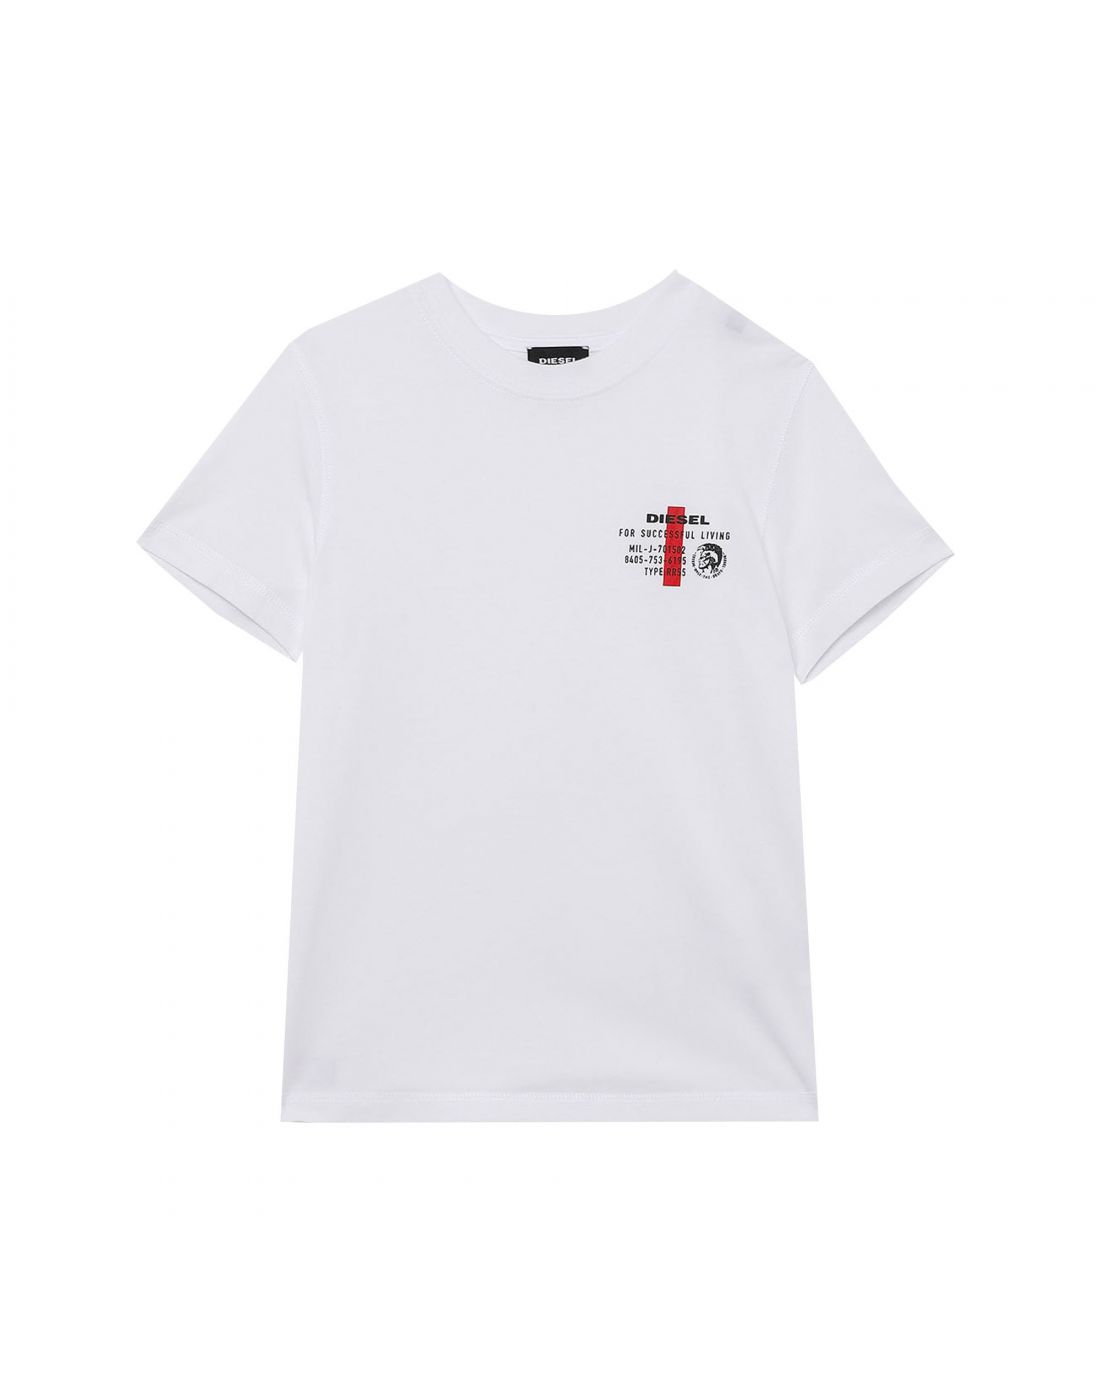 gideal two-sided logo print t shirt